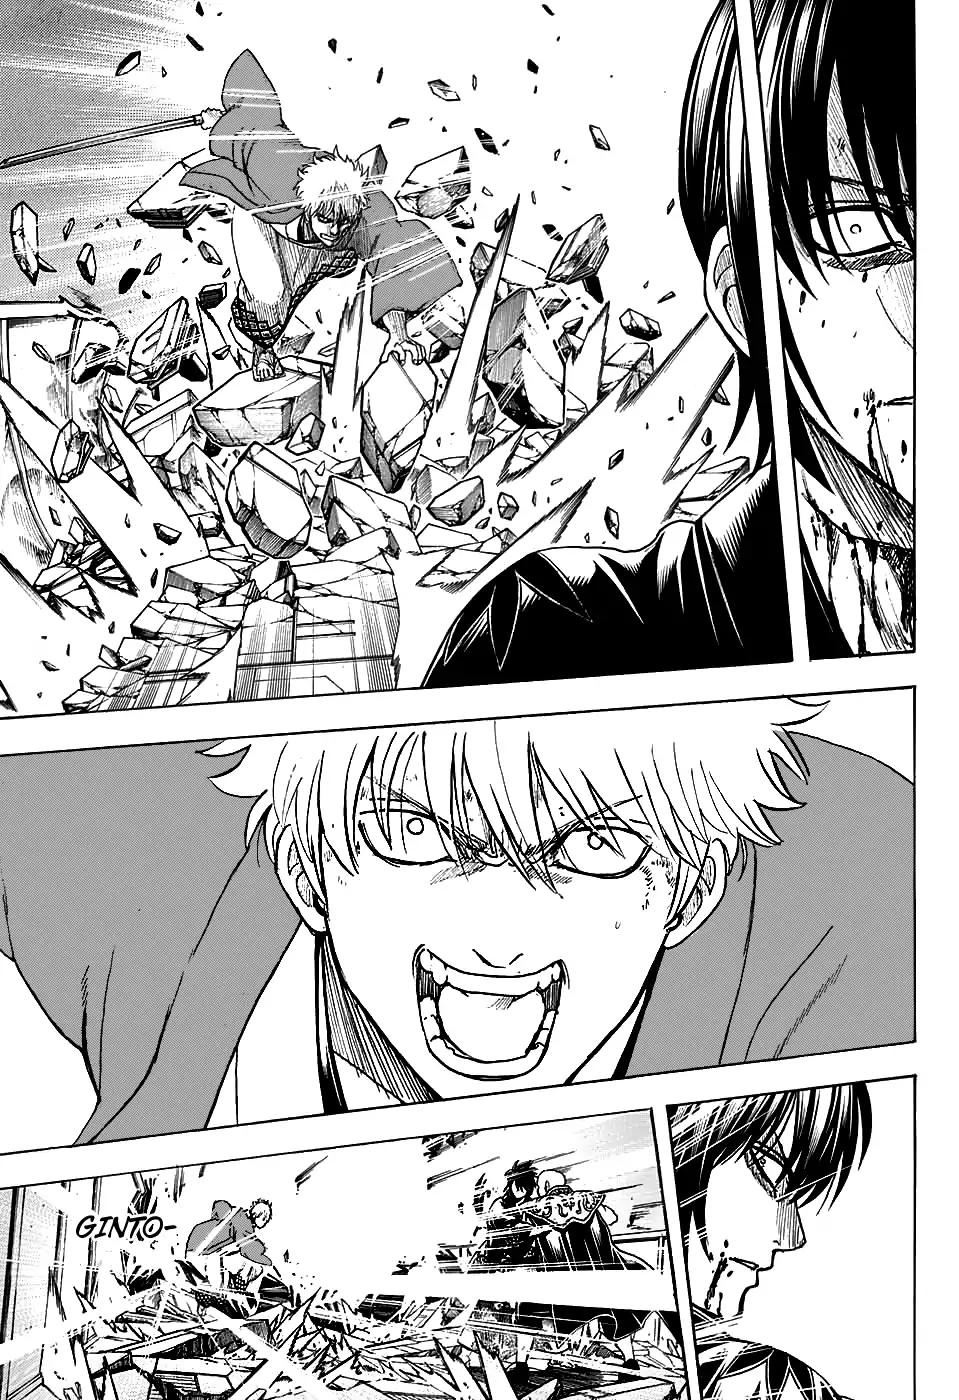 Gintama chapter 700 page 44